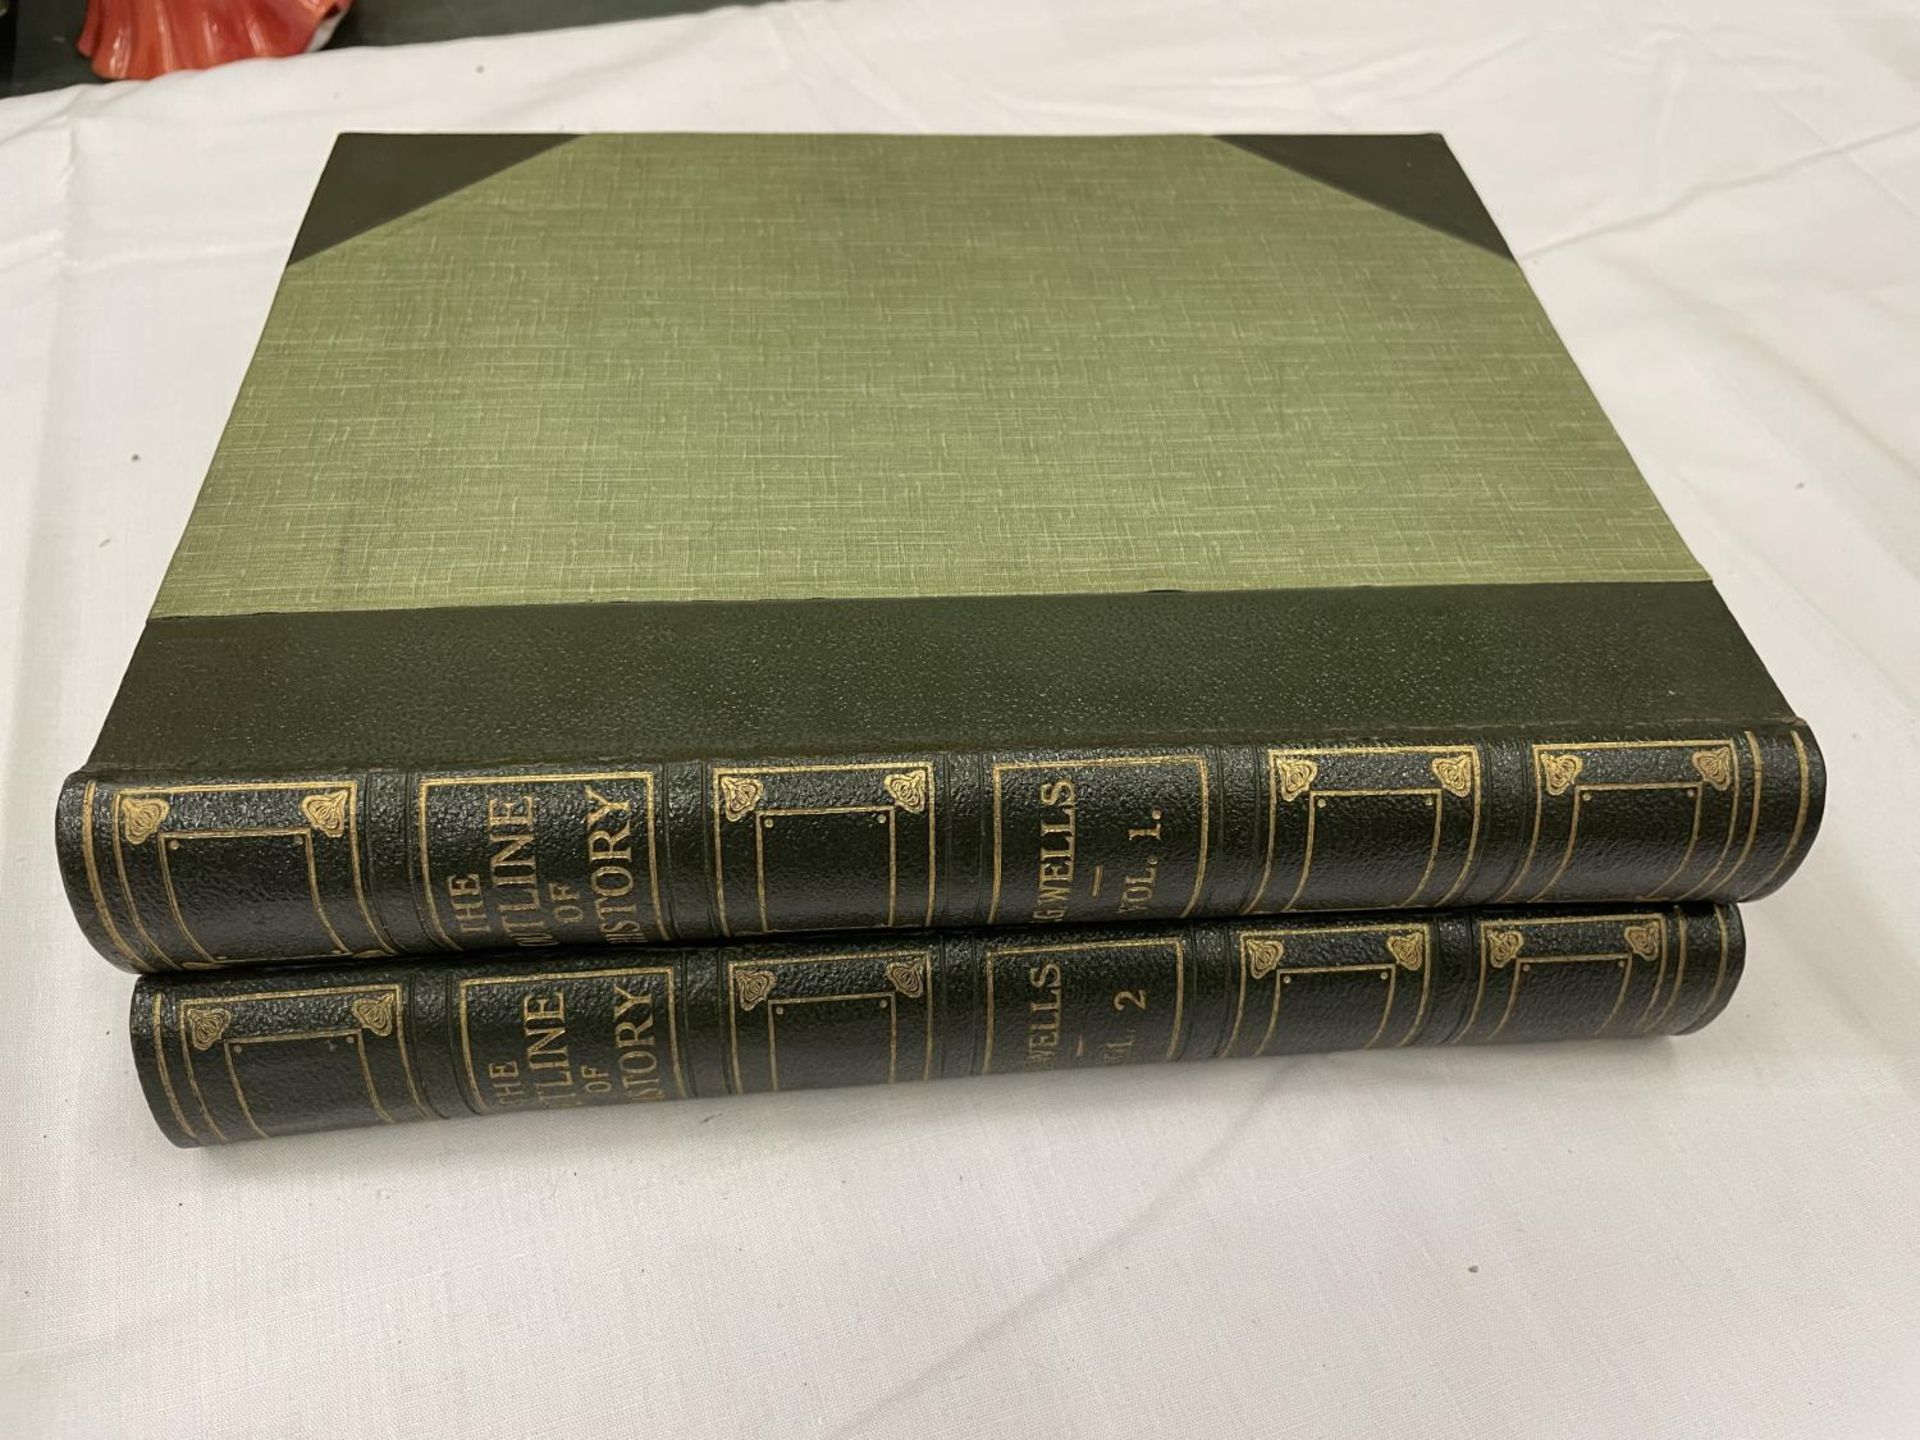 FIRST EDITION THE OUTLINE OF HISTORY VOL 1 AND 2 BY H G WELLS